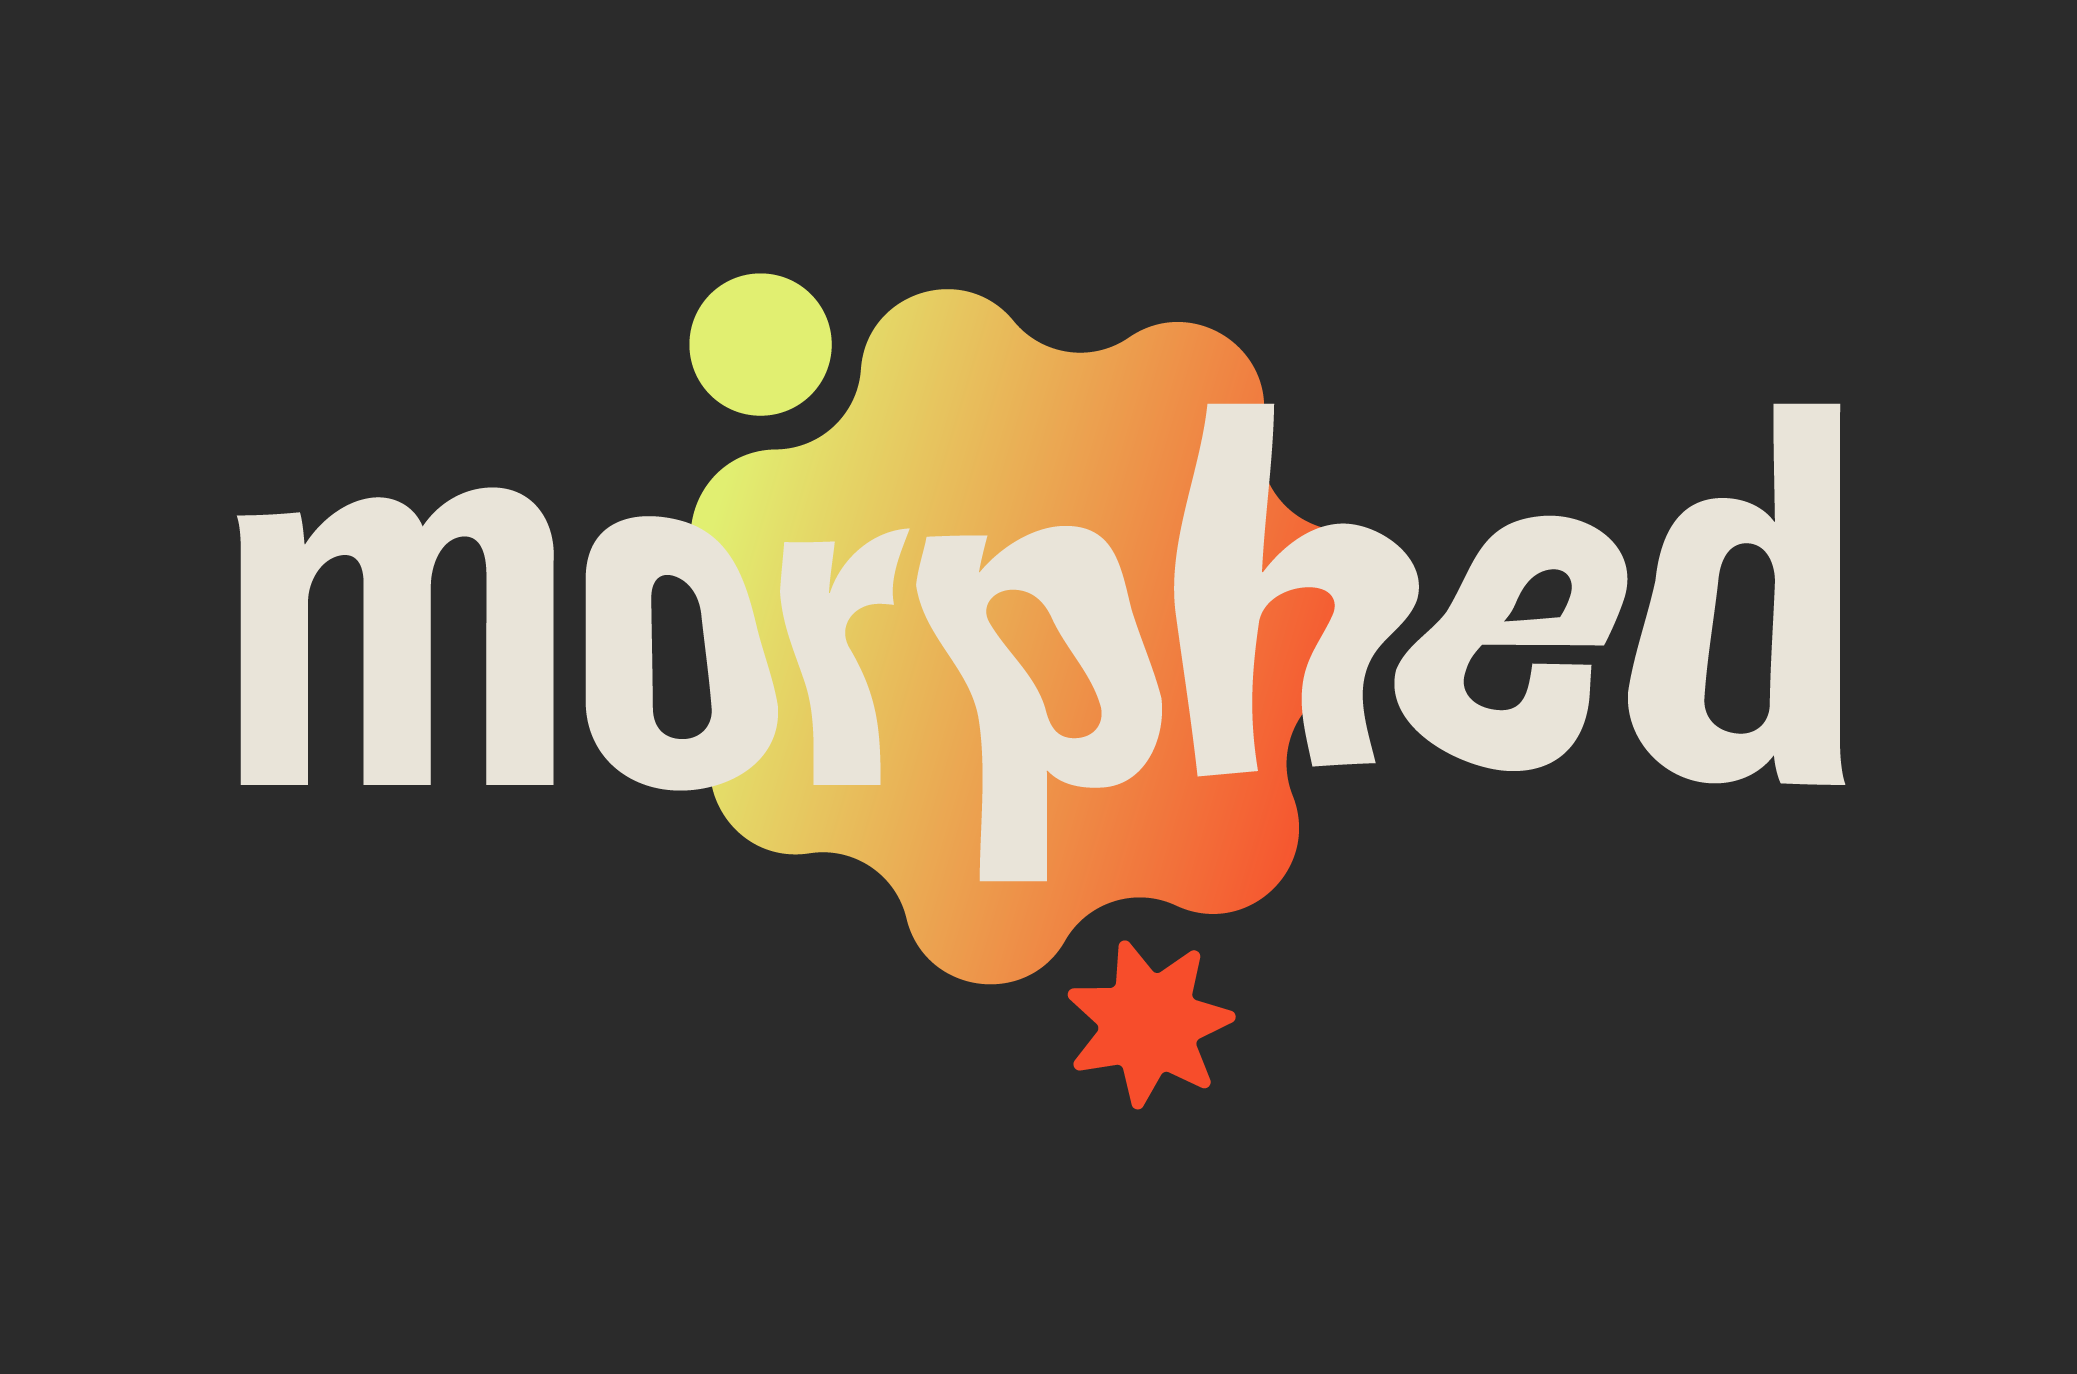 Black background with a yellow, orange, and red flower shaped spot in the middle. The word morphed is in white over the spot.